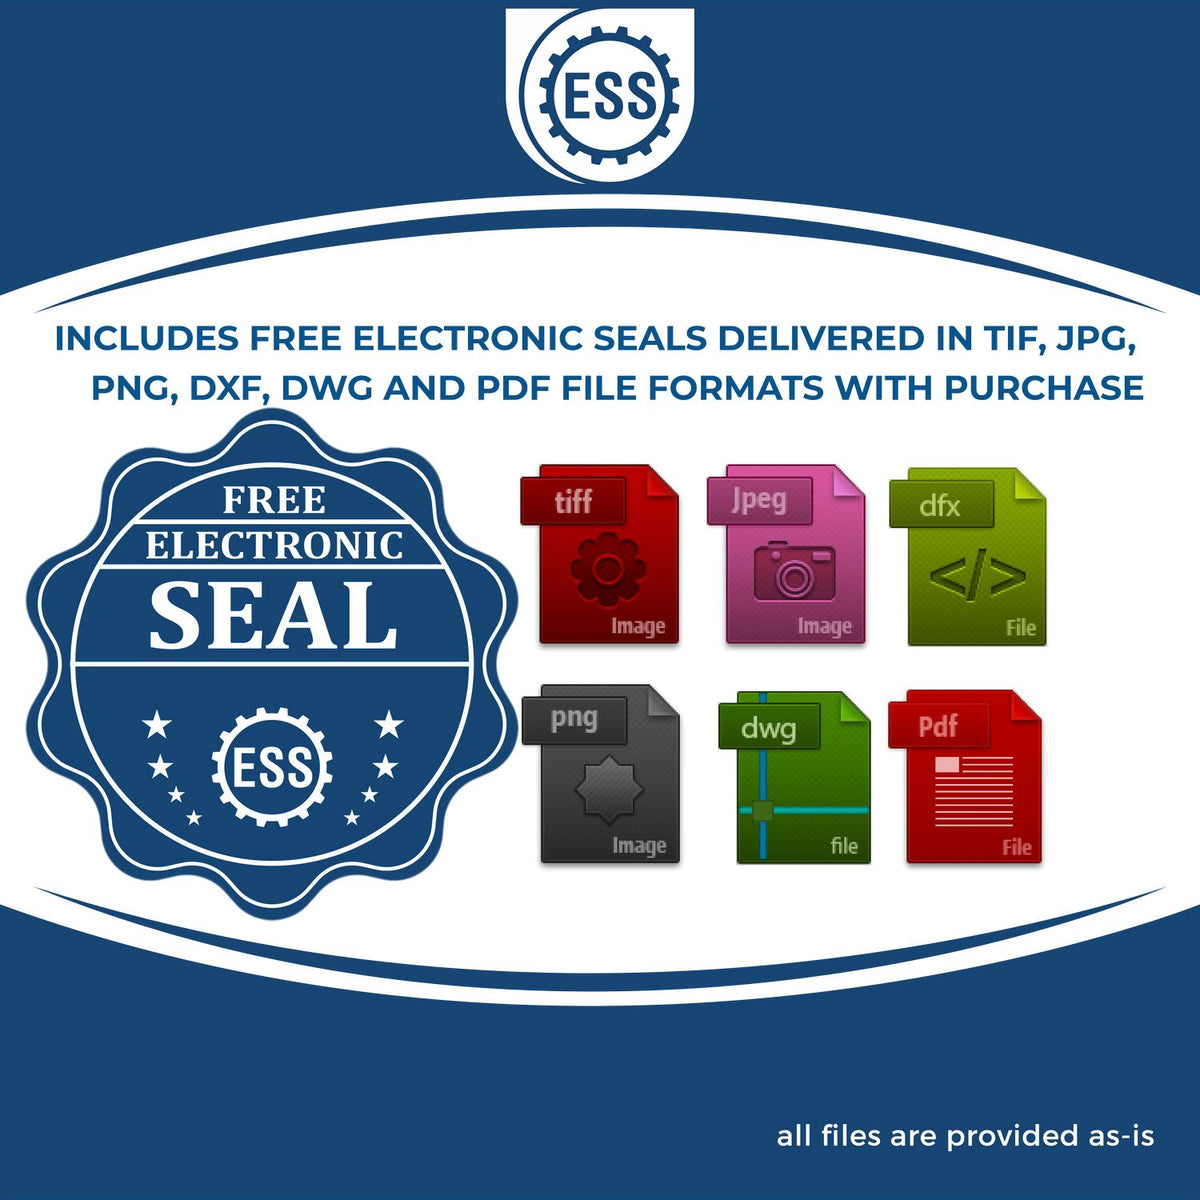 An infographic for the free electronic seal for the Soft Oklahoma Professional Geologist Seal illustrating the different file type icons such as DXF, DWG, TIF, JPG and PNG.